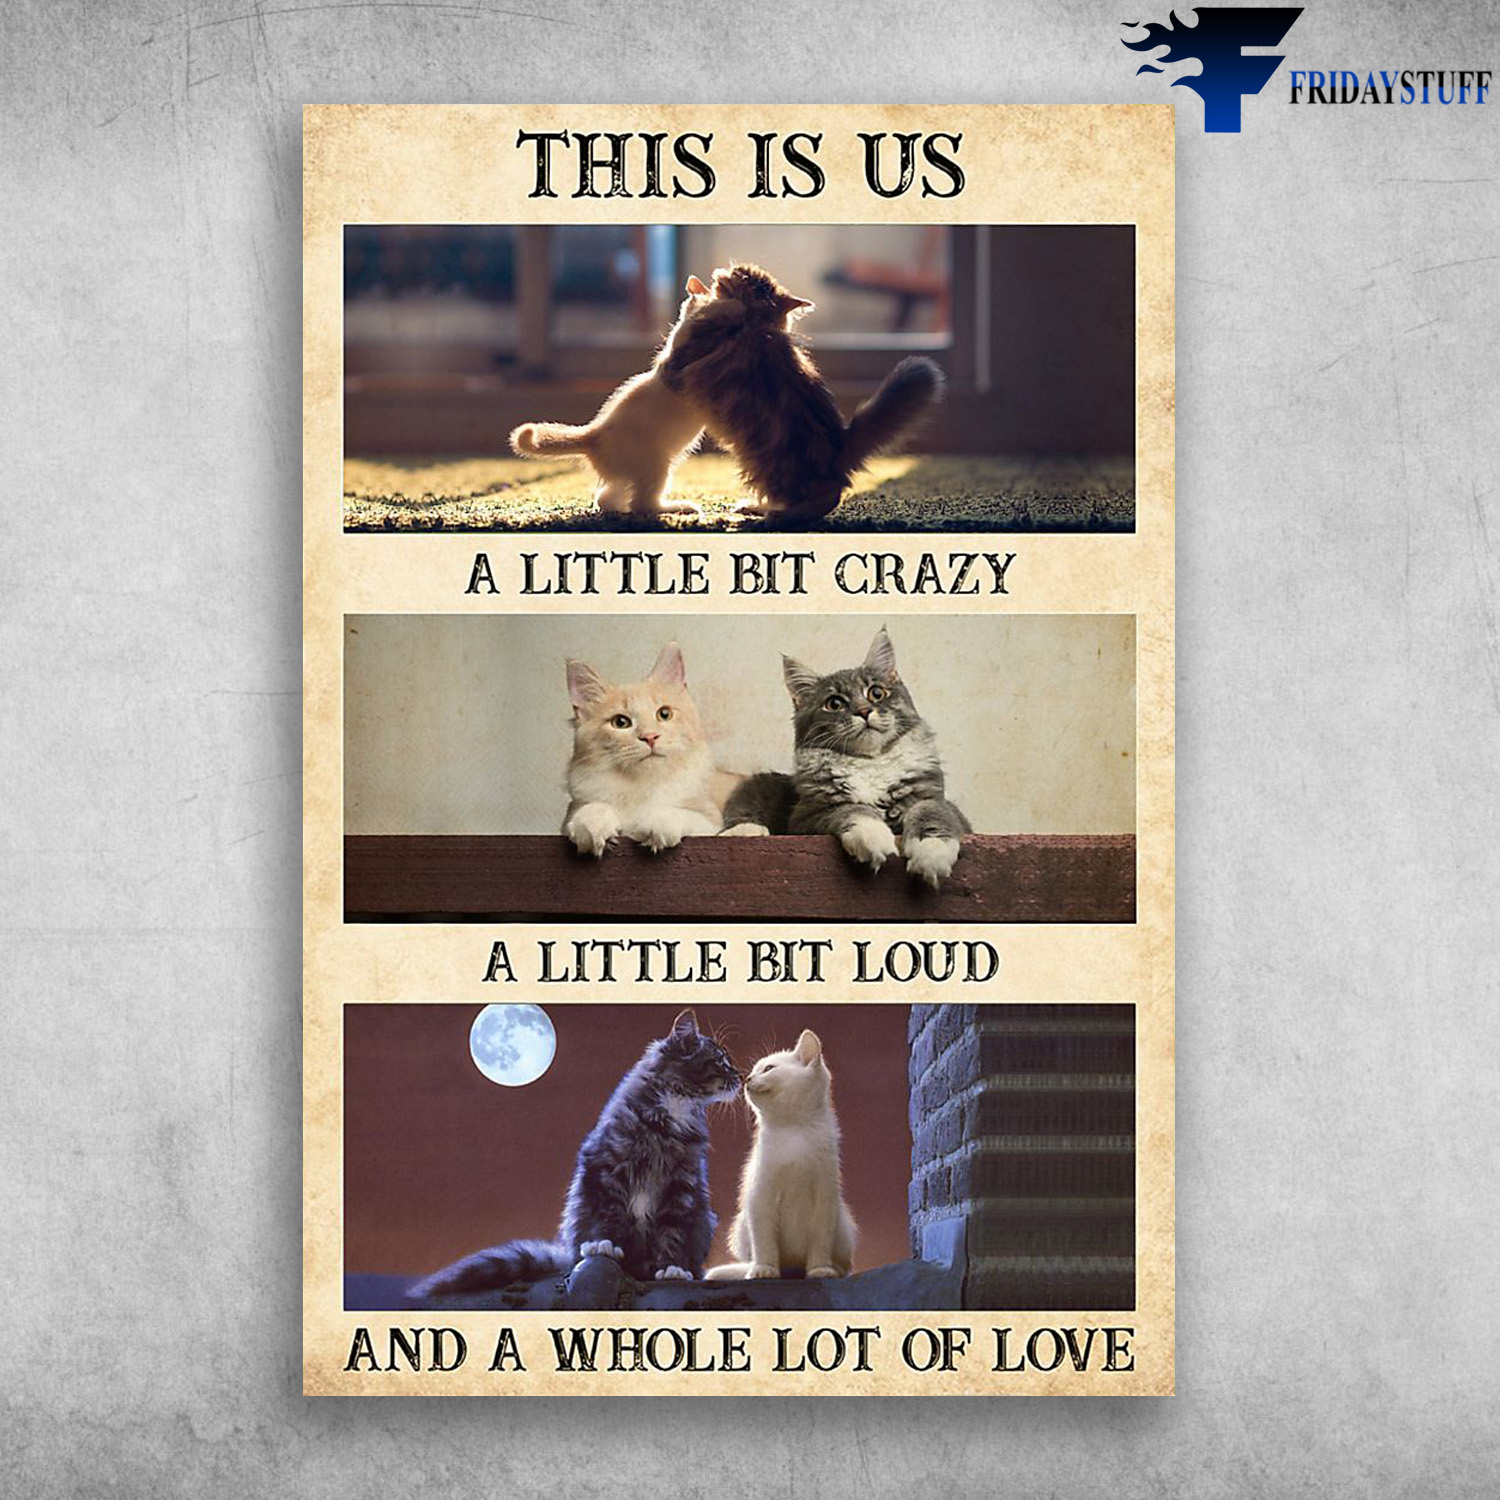 Maine Coon Cat Couple - This Is Us, A Little Bit Crazy, A Little Bit Loud, And A Whole Lot Of Love